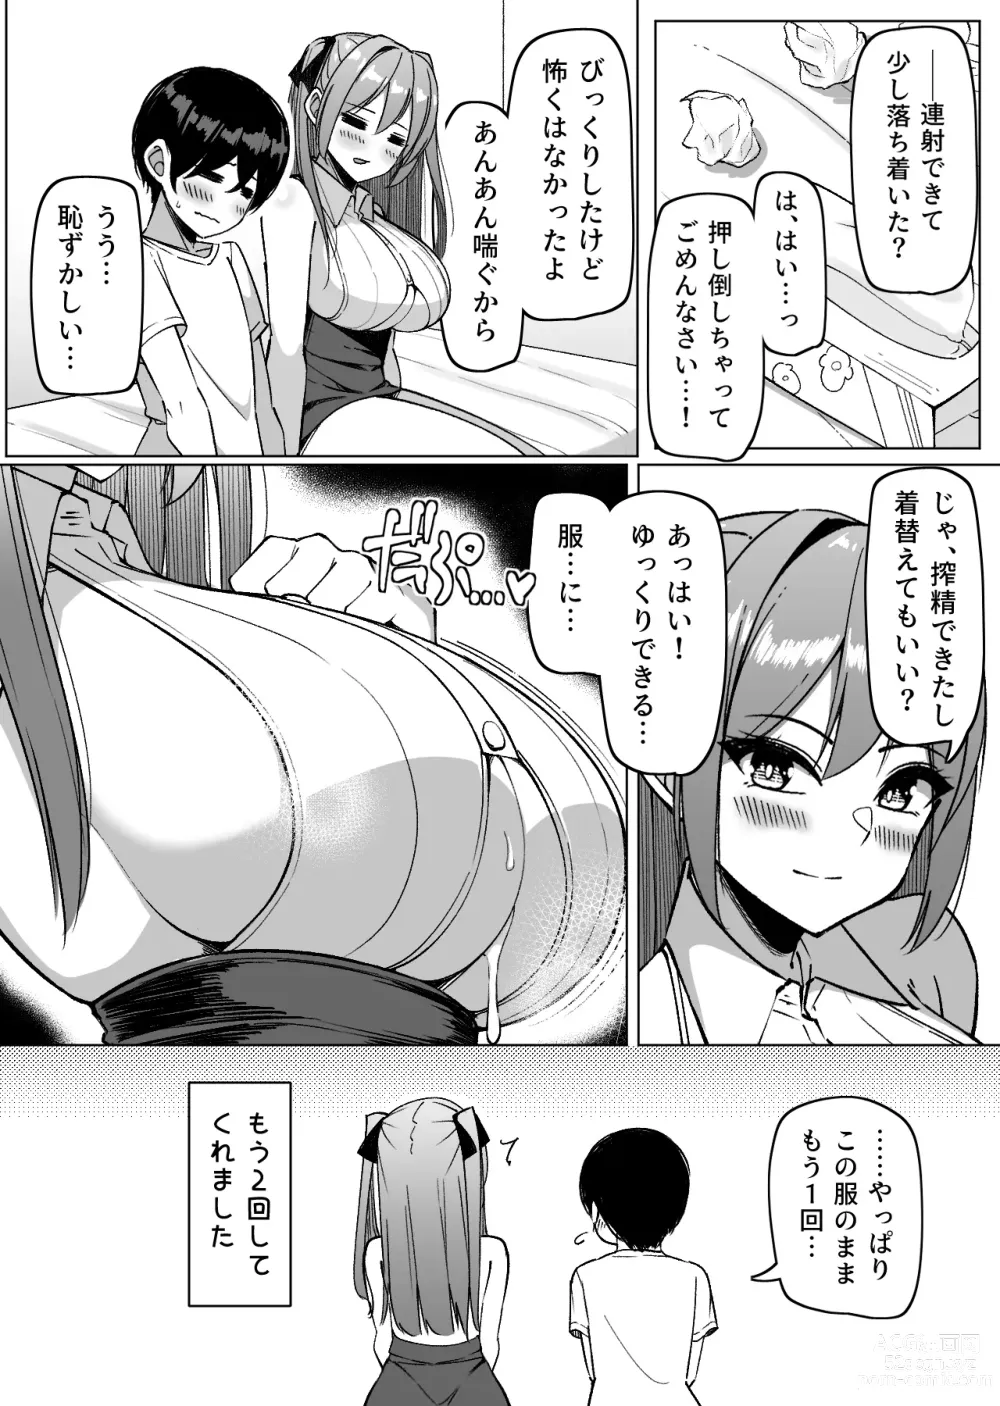 Page 27 of doujinshi Daily Sleepover With Big-breasted Girls